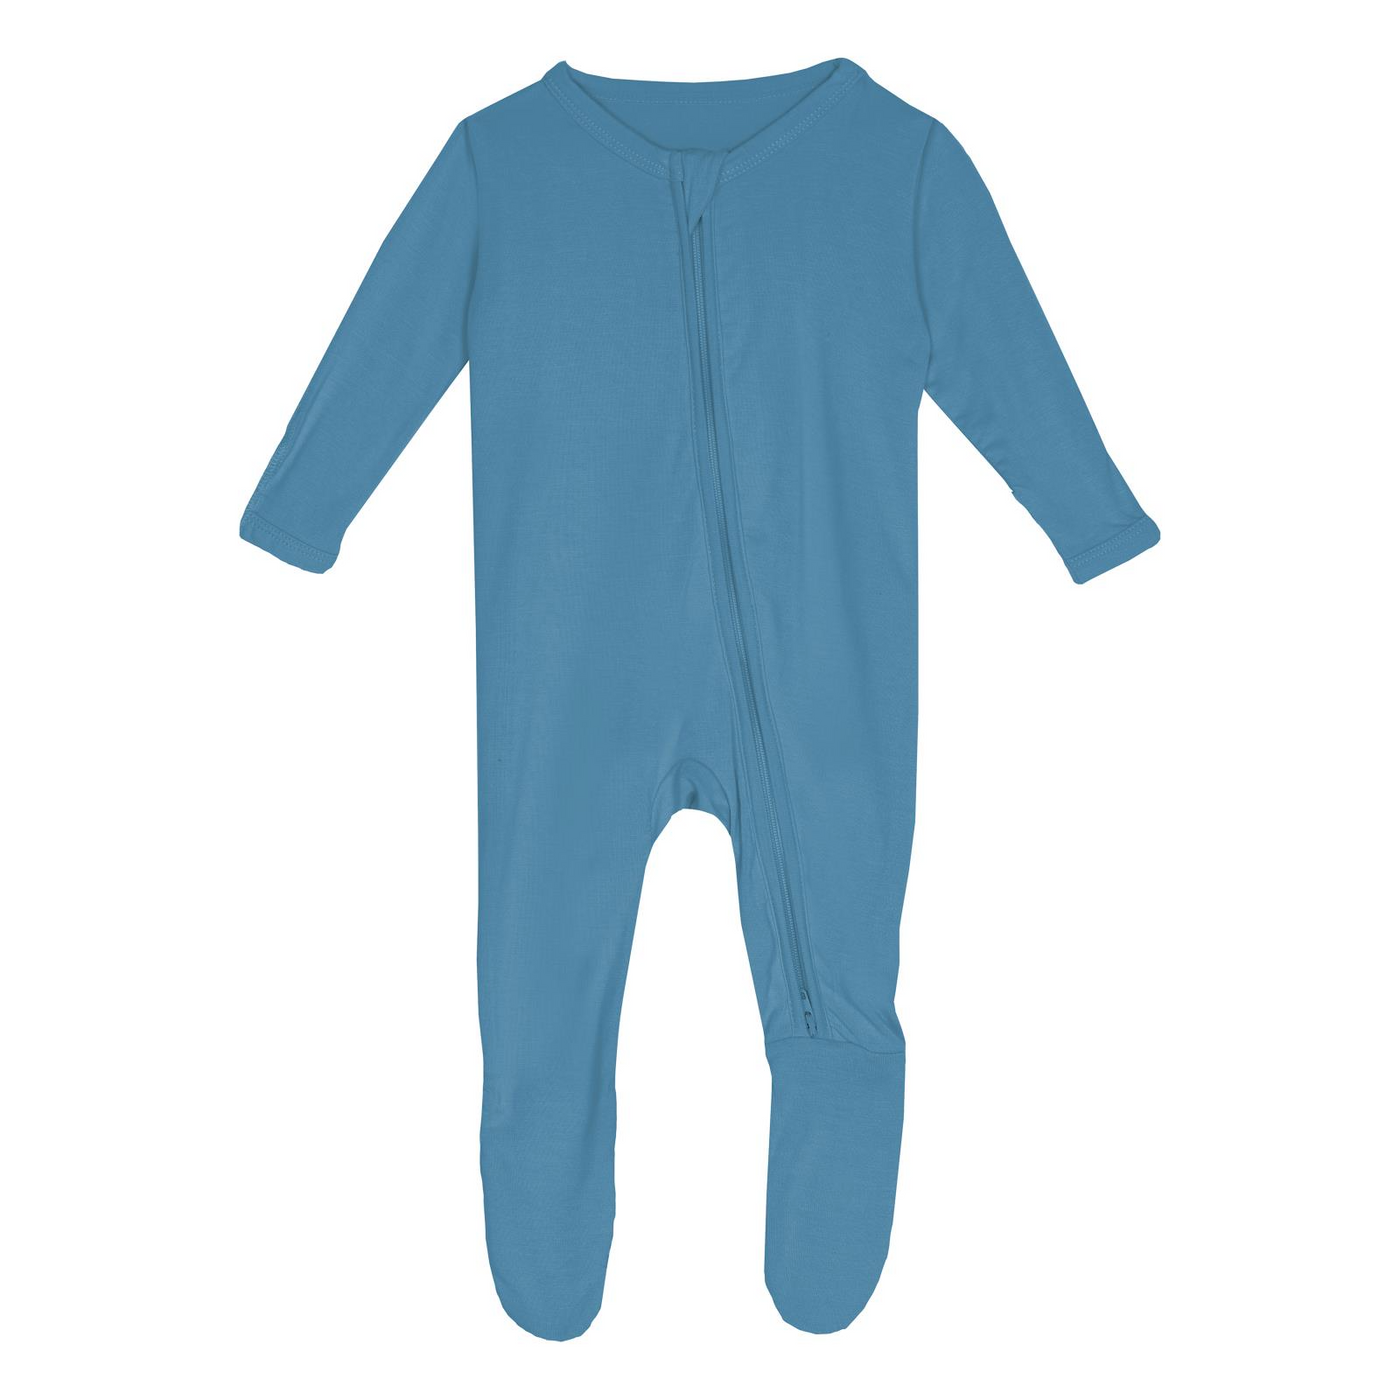 Kickee Pants Footie With Snaps: Solid Blue Moon